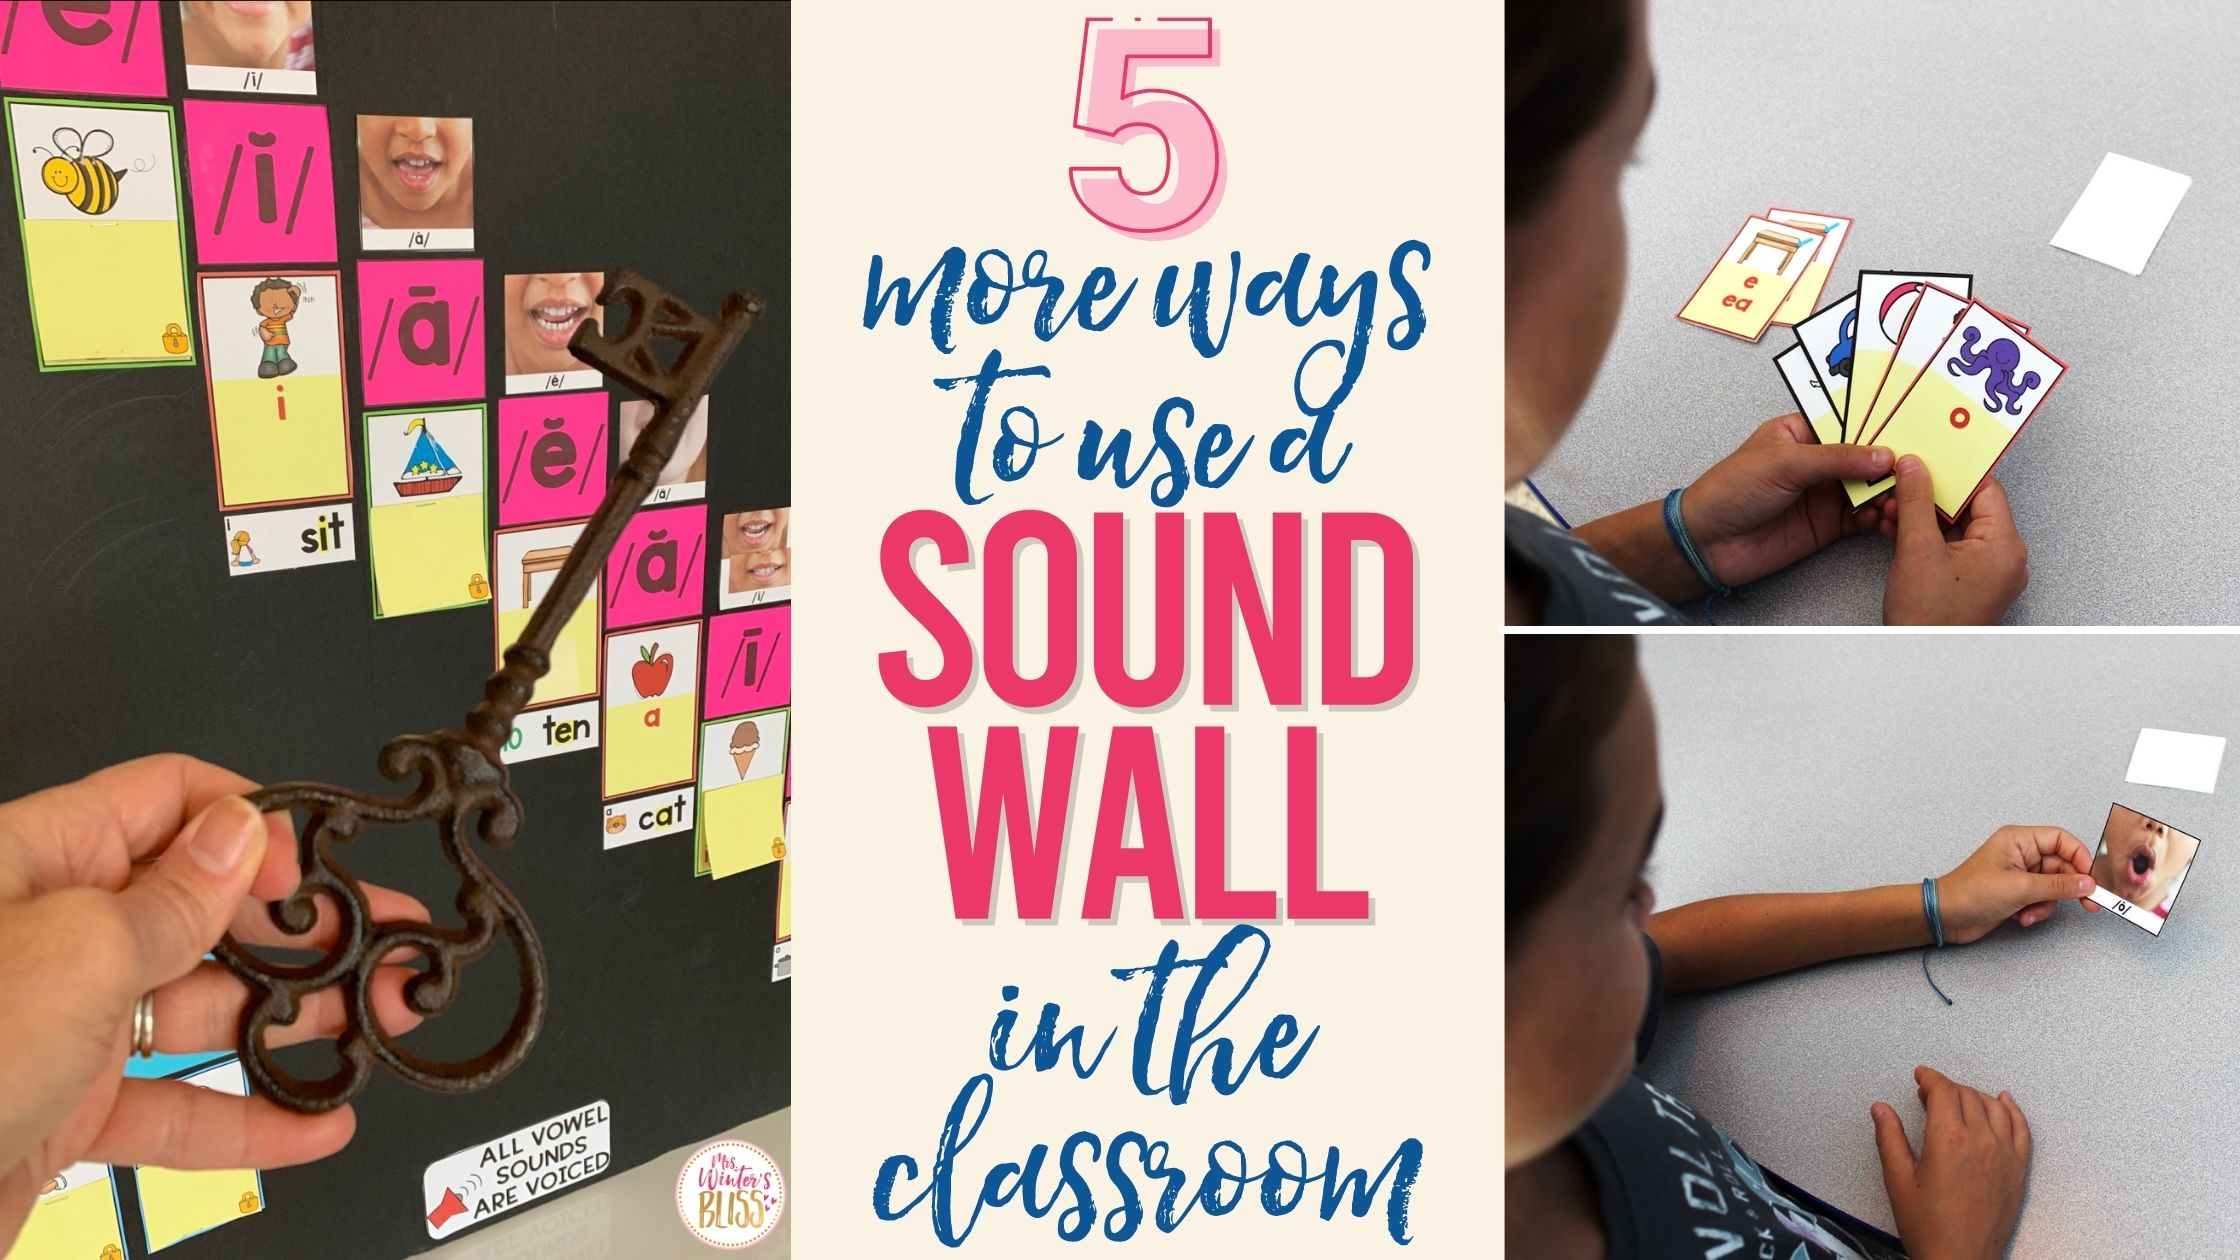 5 More Ways to Use a Sound Wall in the Classroom